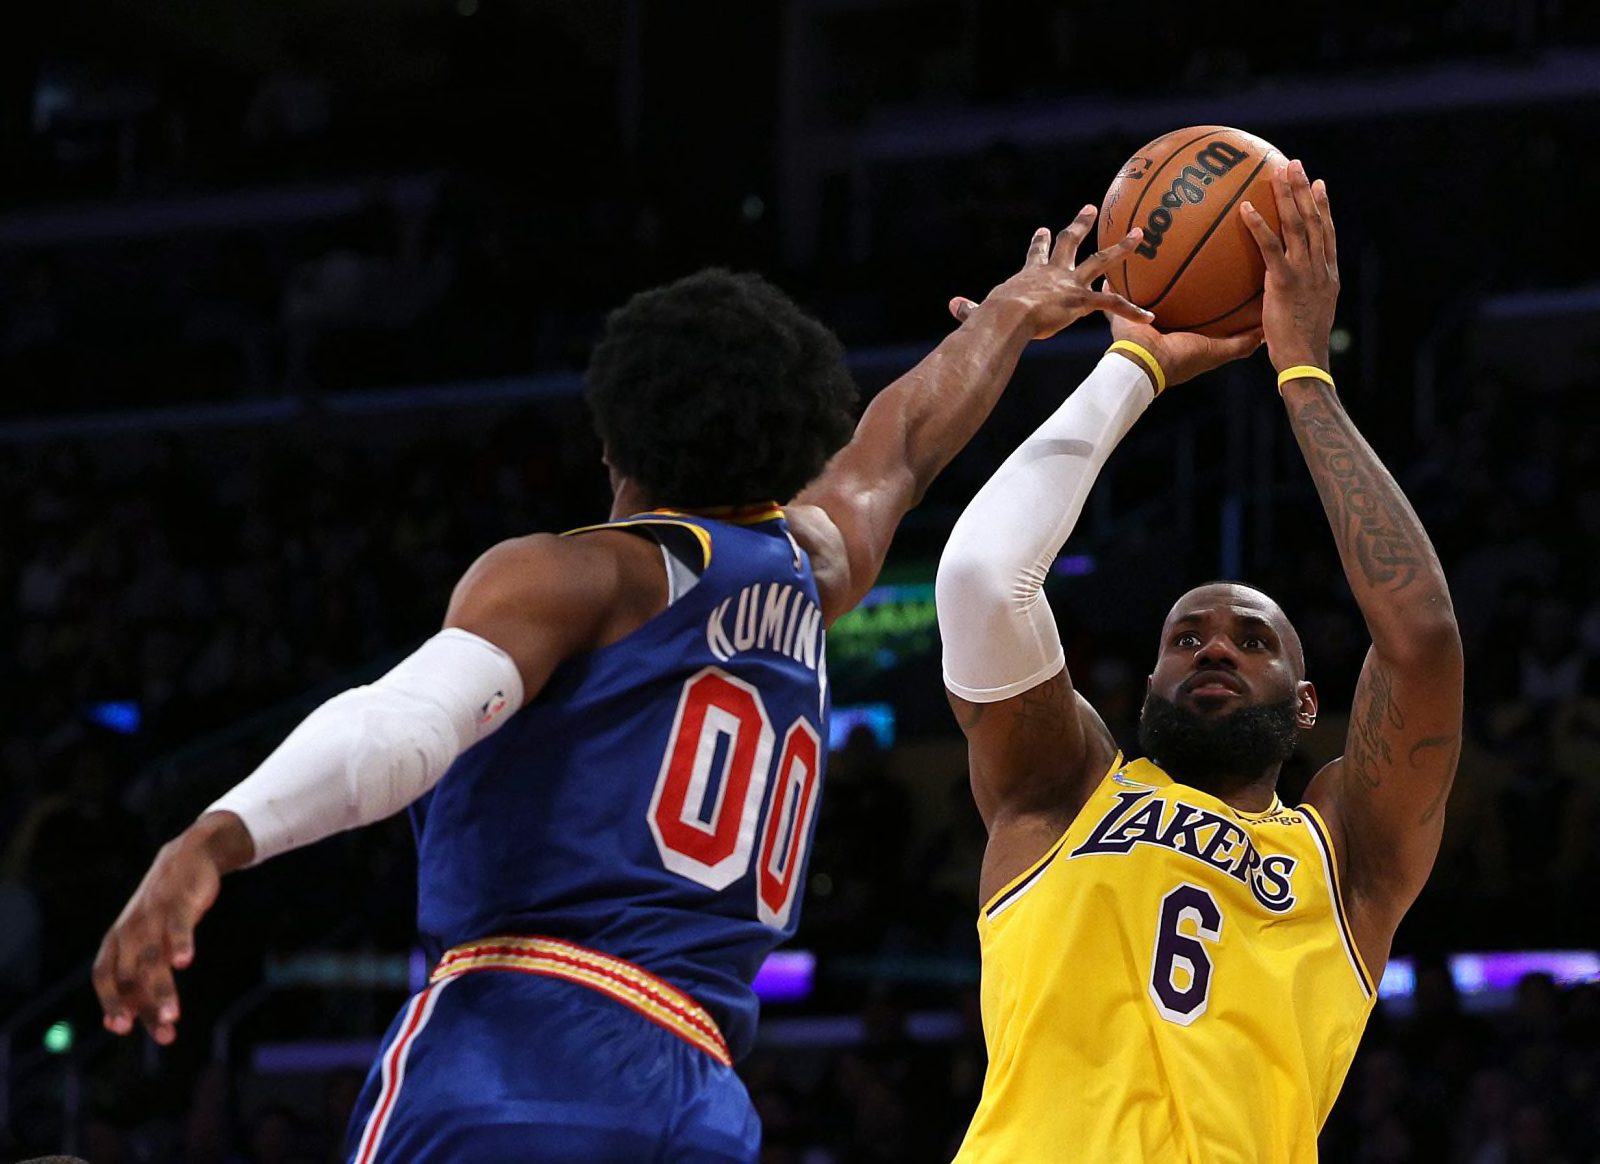 Los Angeles Lakers apparently need 50 from LeBron James nightly